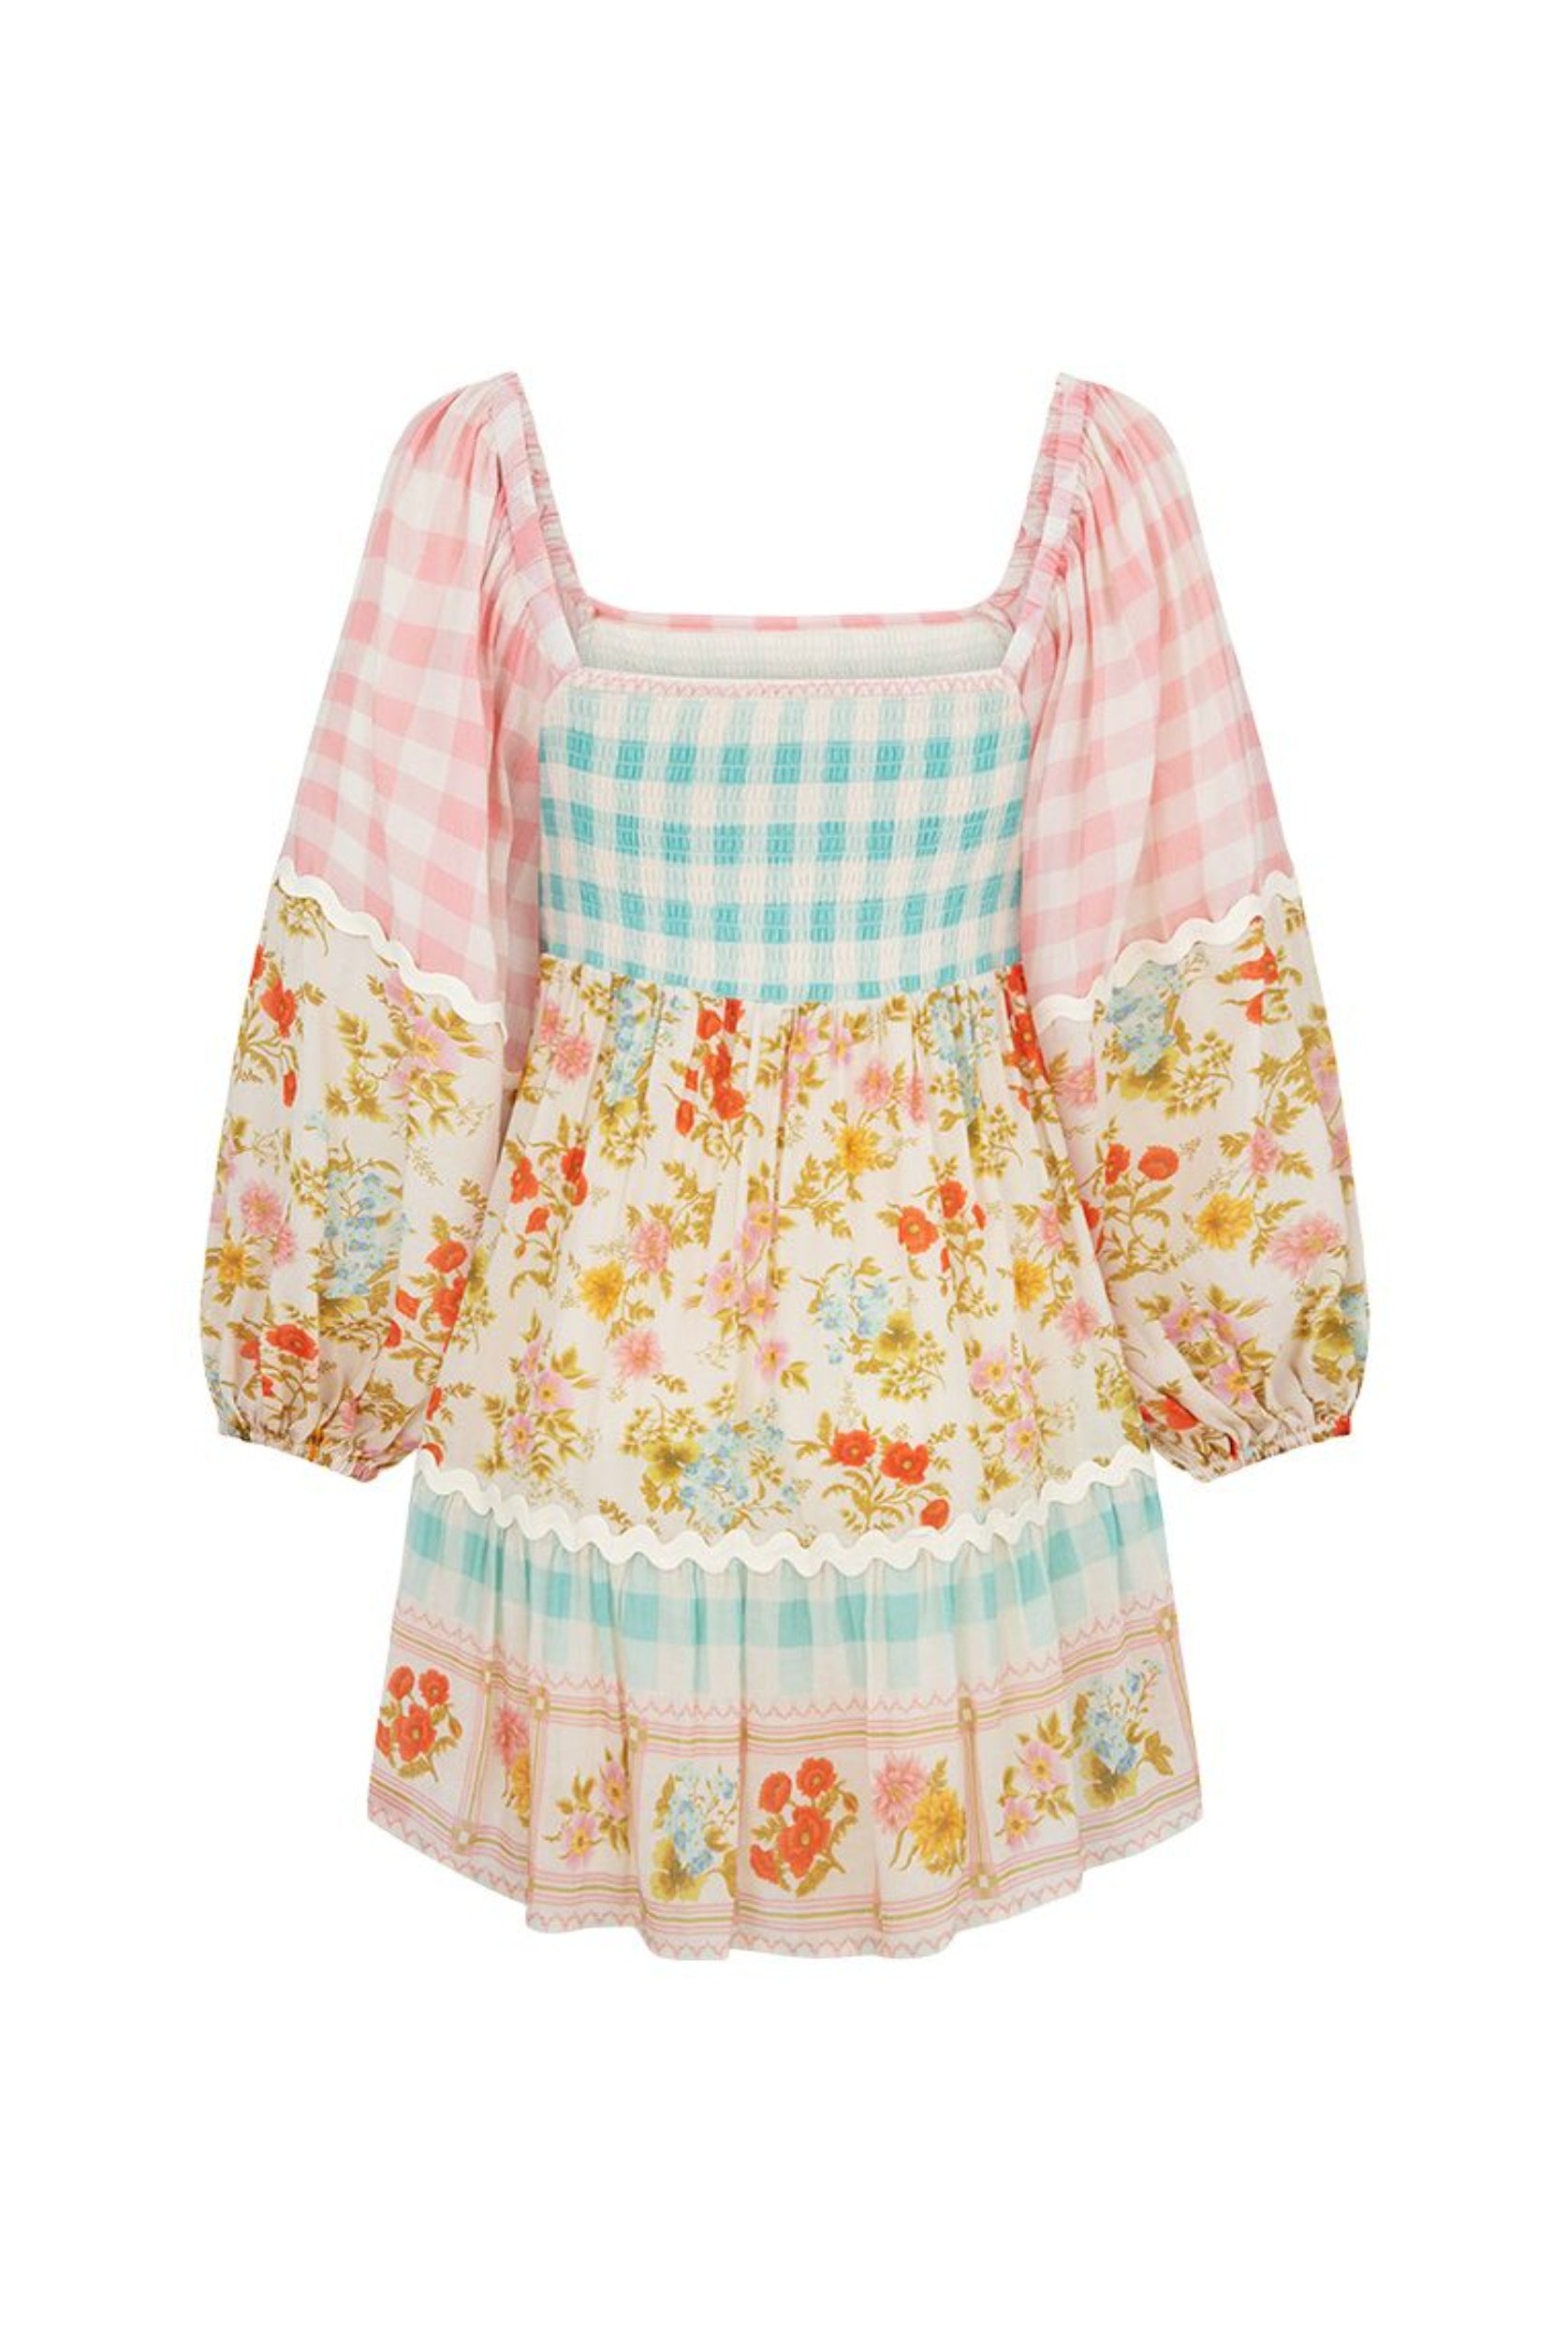 Tunic Dress patchwork floral and gingham